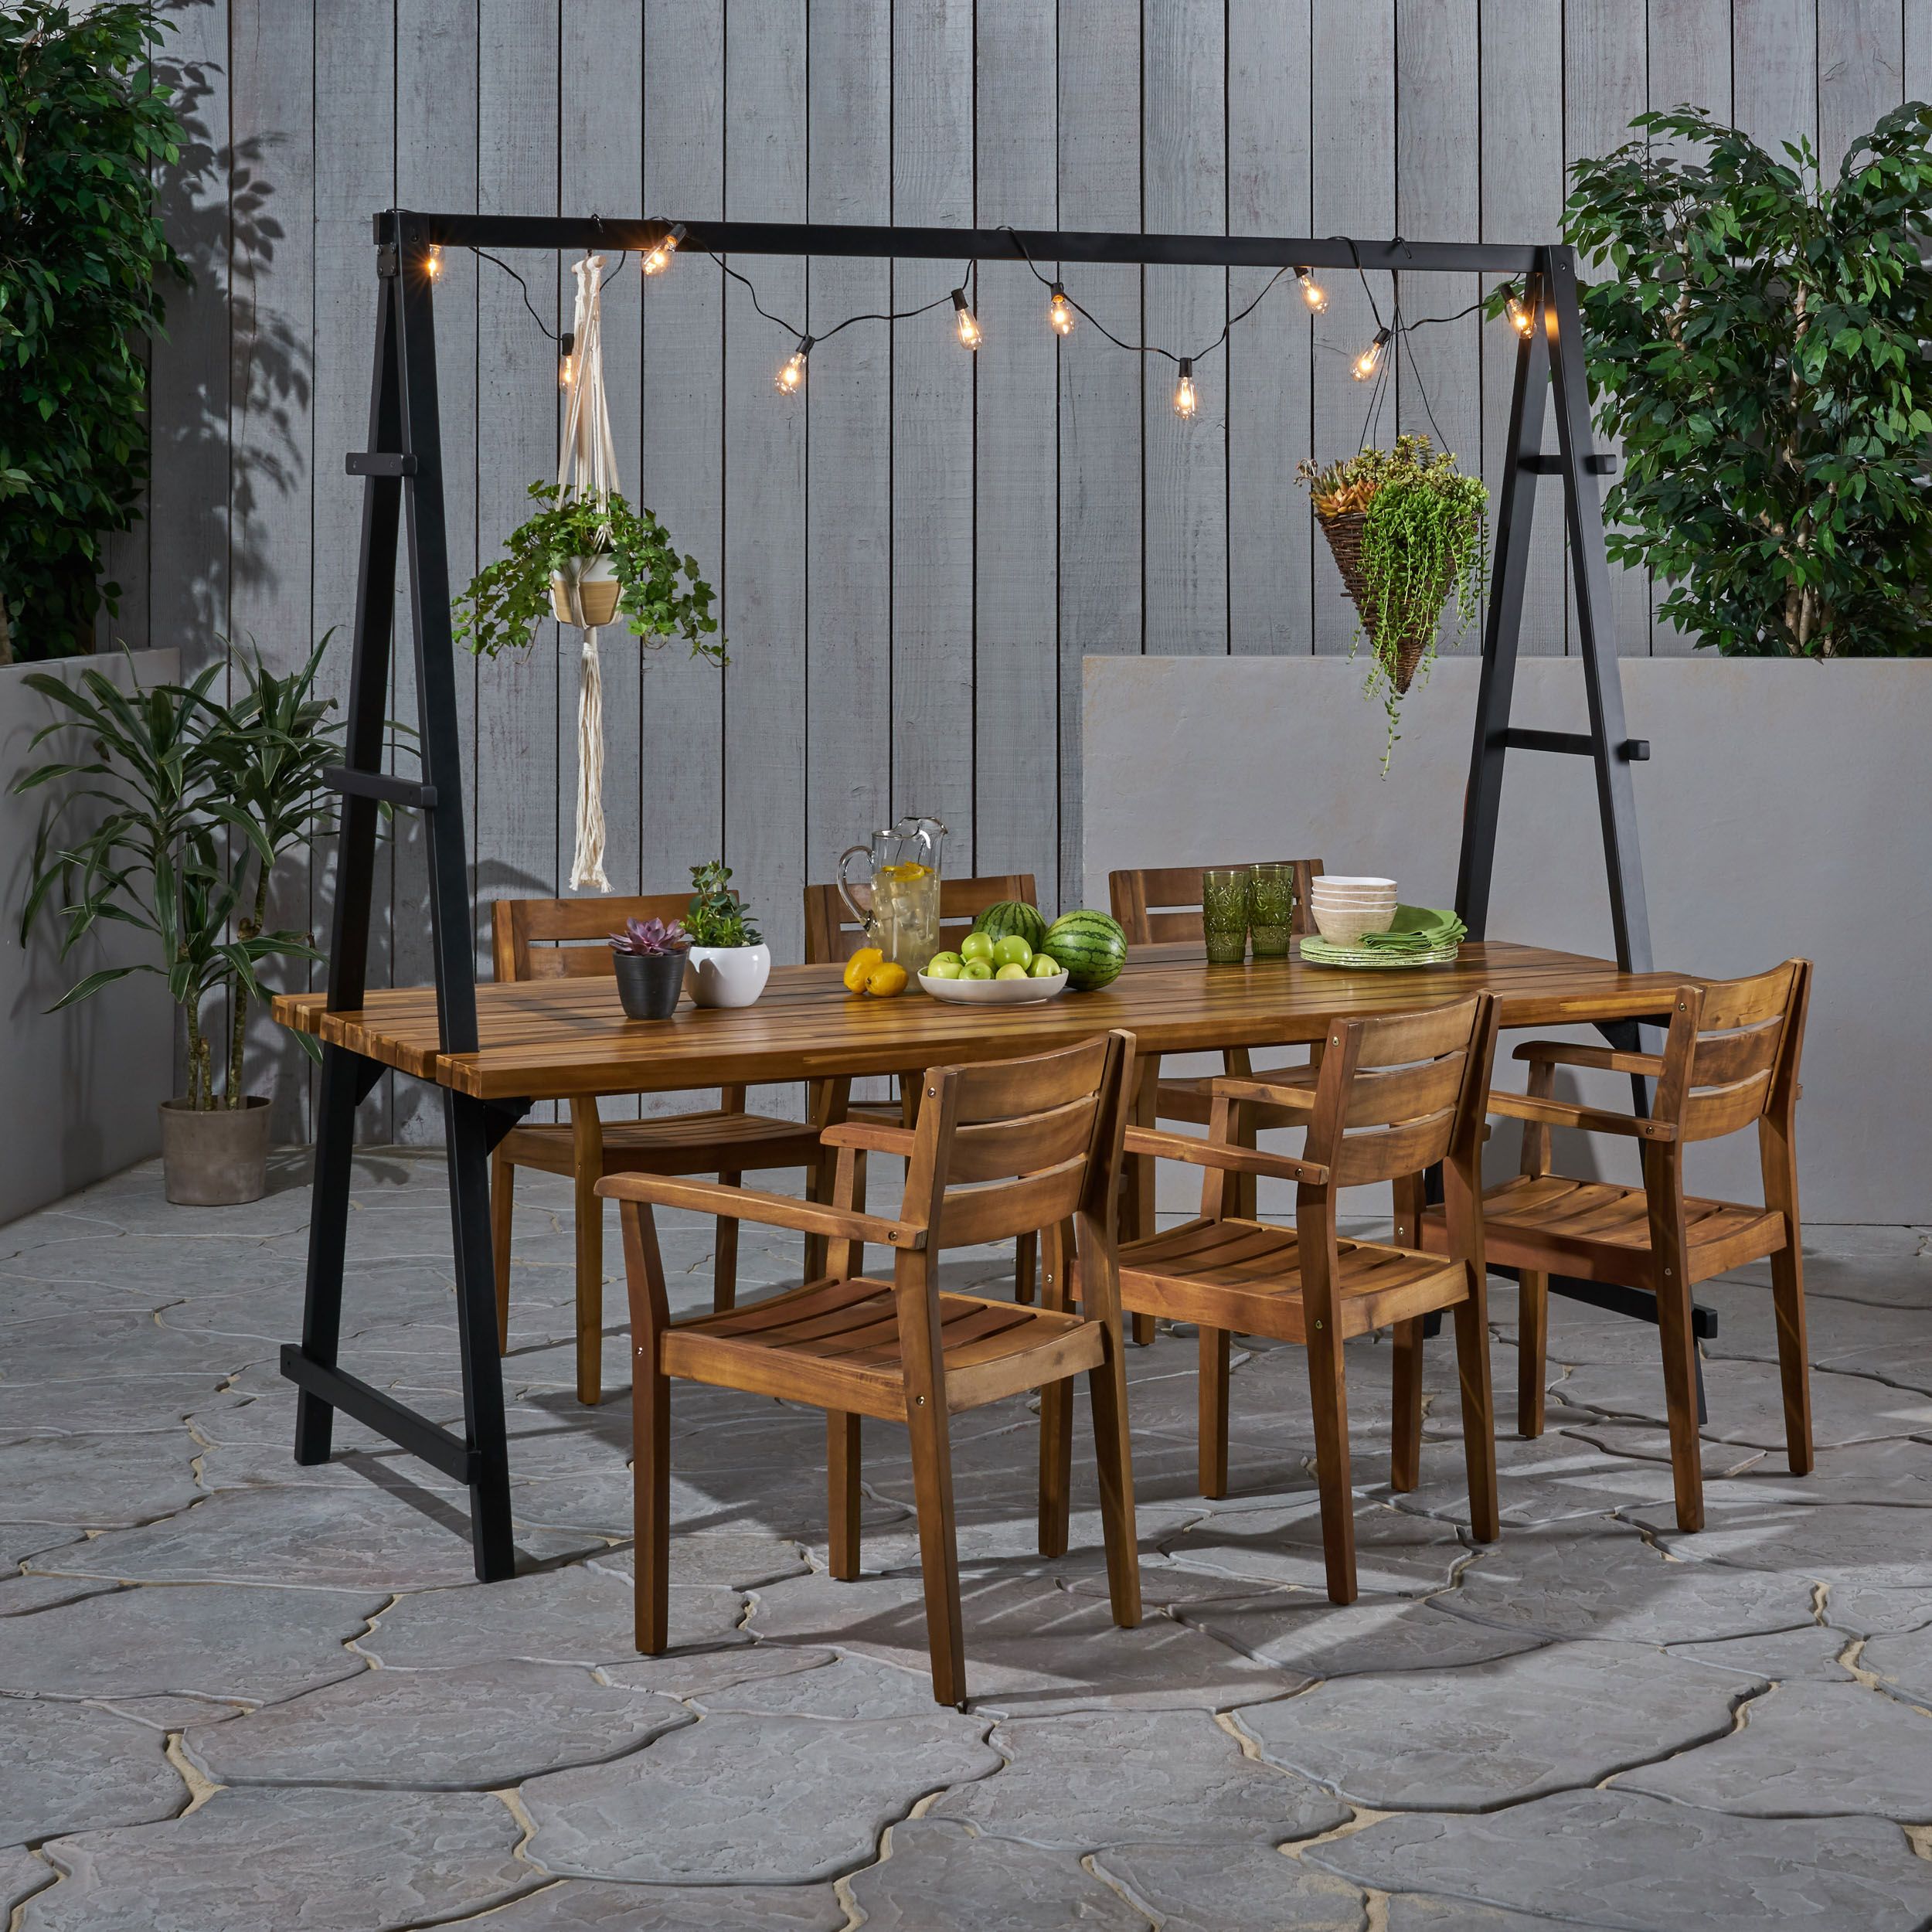 Jenny Outdoor 6 Seater Acacia Wood And Iron Planter Dining Set, Teak Throughout Teak Folding Chair Patio Dining Sets (View 15 of 15)